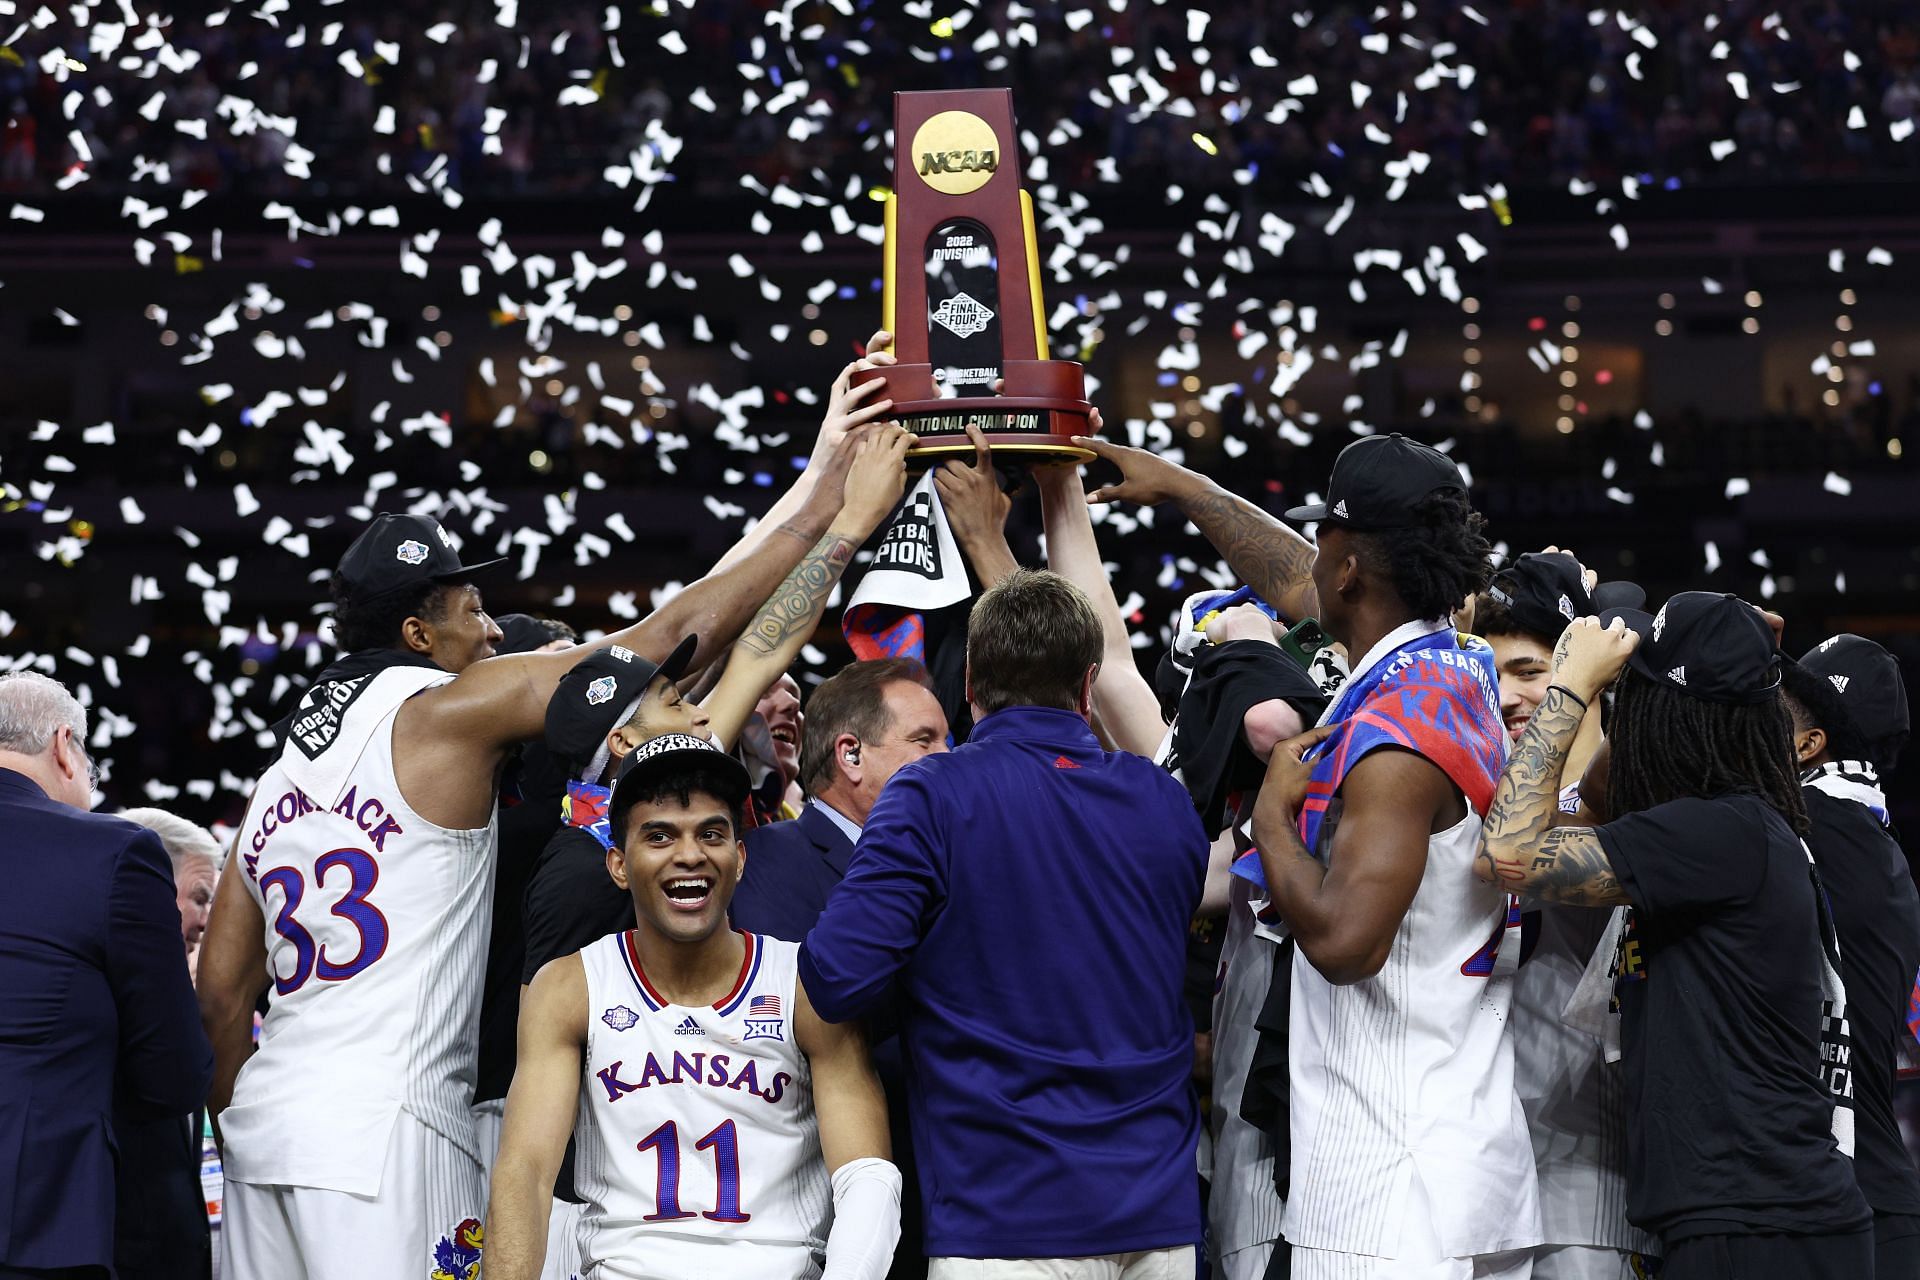 The Kansas Jayhawks won the national championship thanks to great performances from their star players.